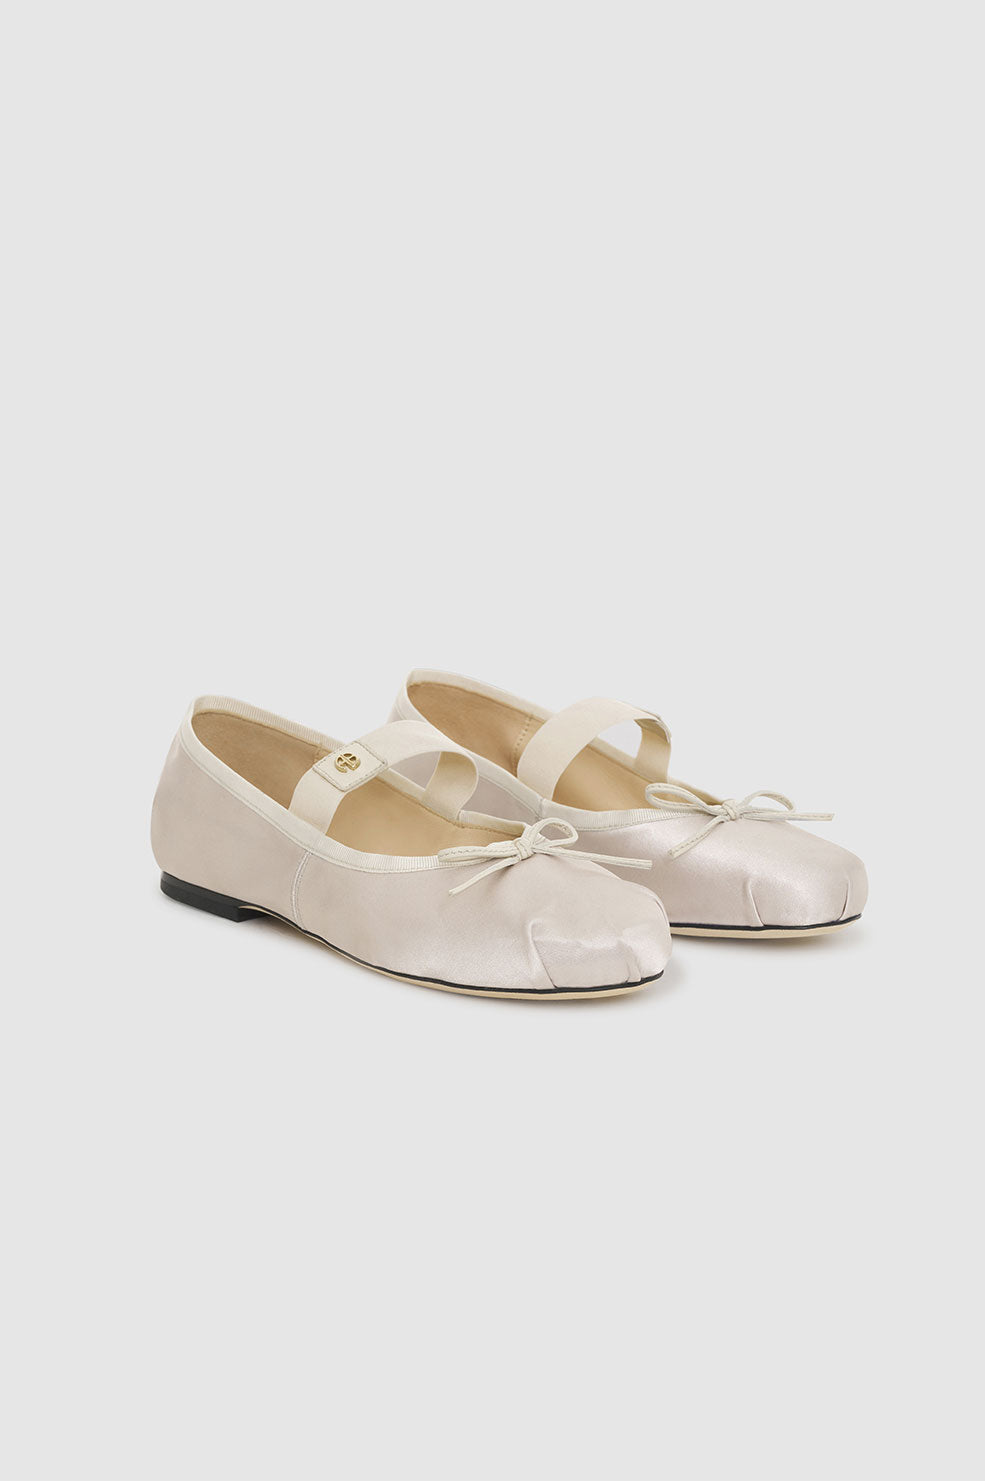 ANINE BING Jolie Flats - Champagne - Side Pair View